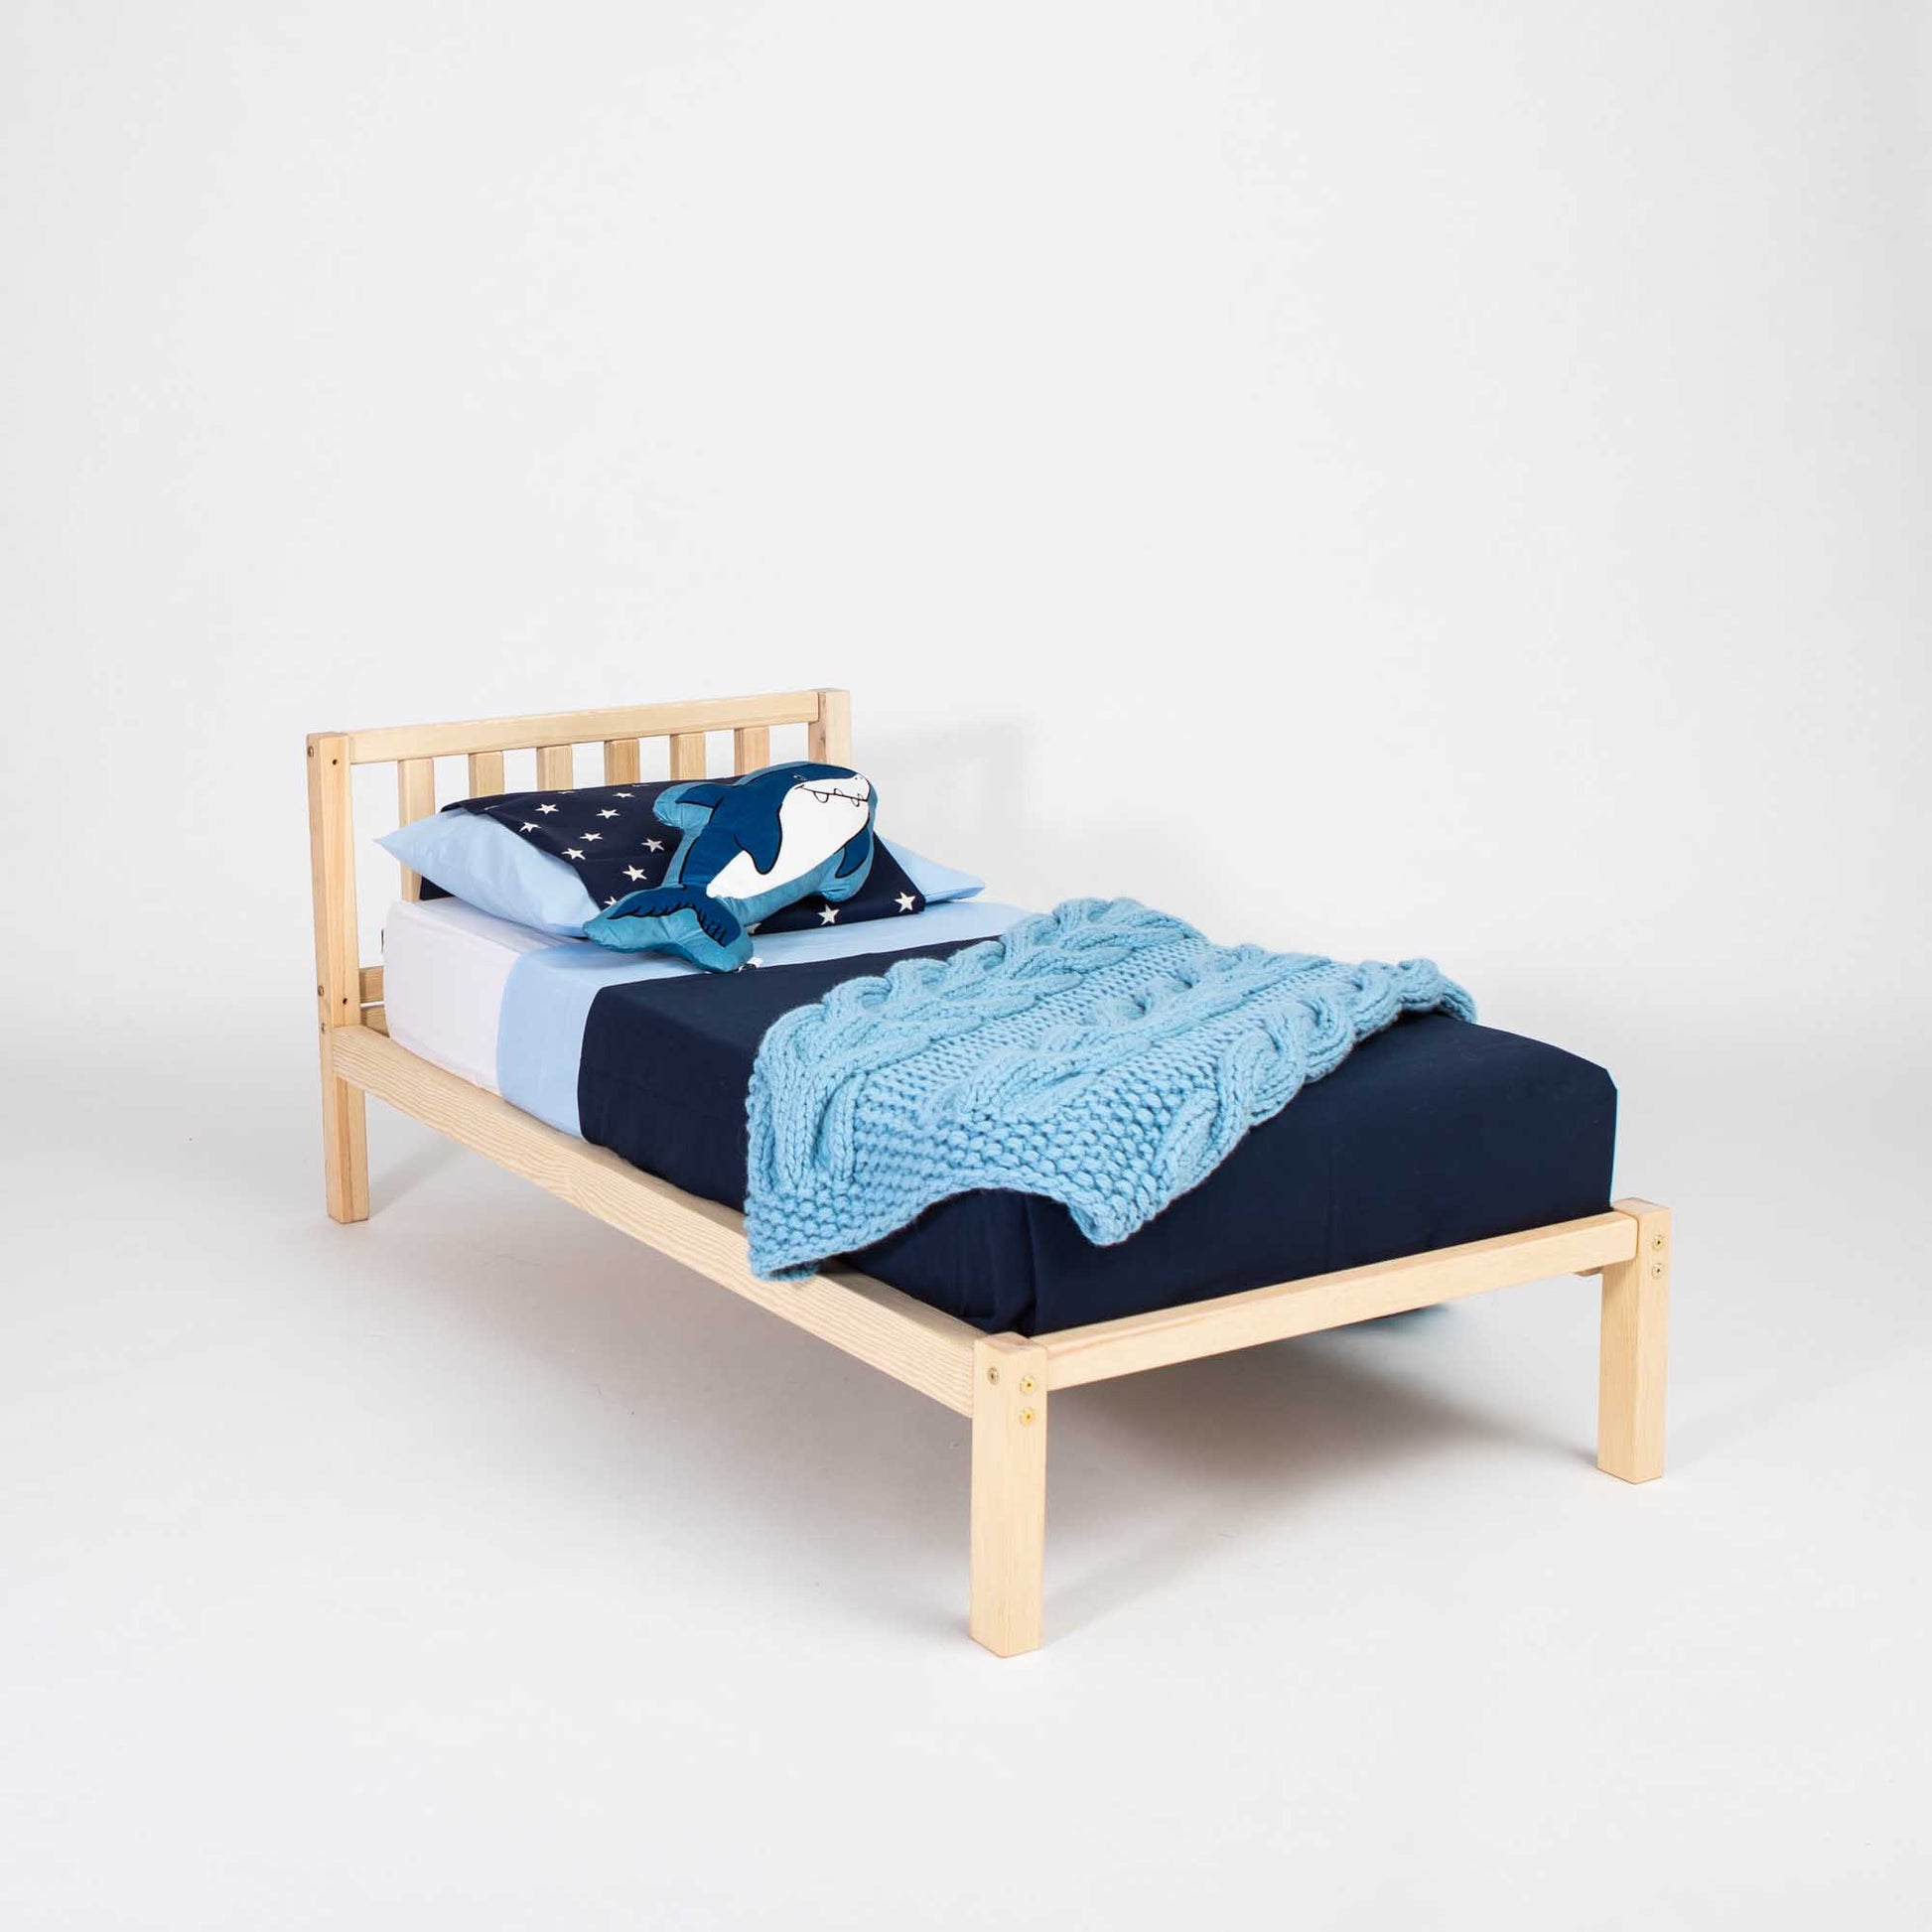 A Sweet Home From Wood 2-in-1 toddler bed on legs with a vertical rail headboard made of solid pine or birch wood, with a blue blanket on top.